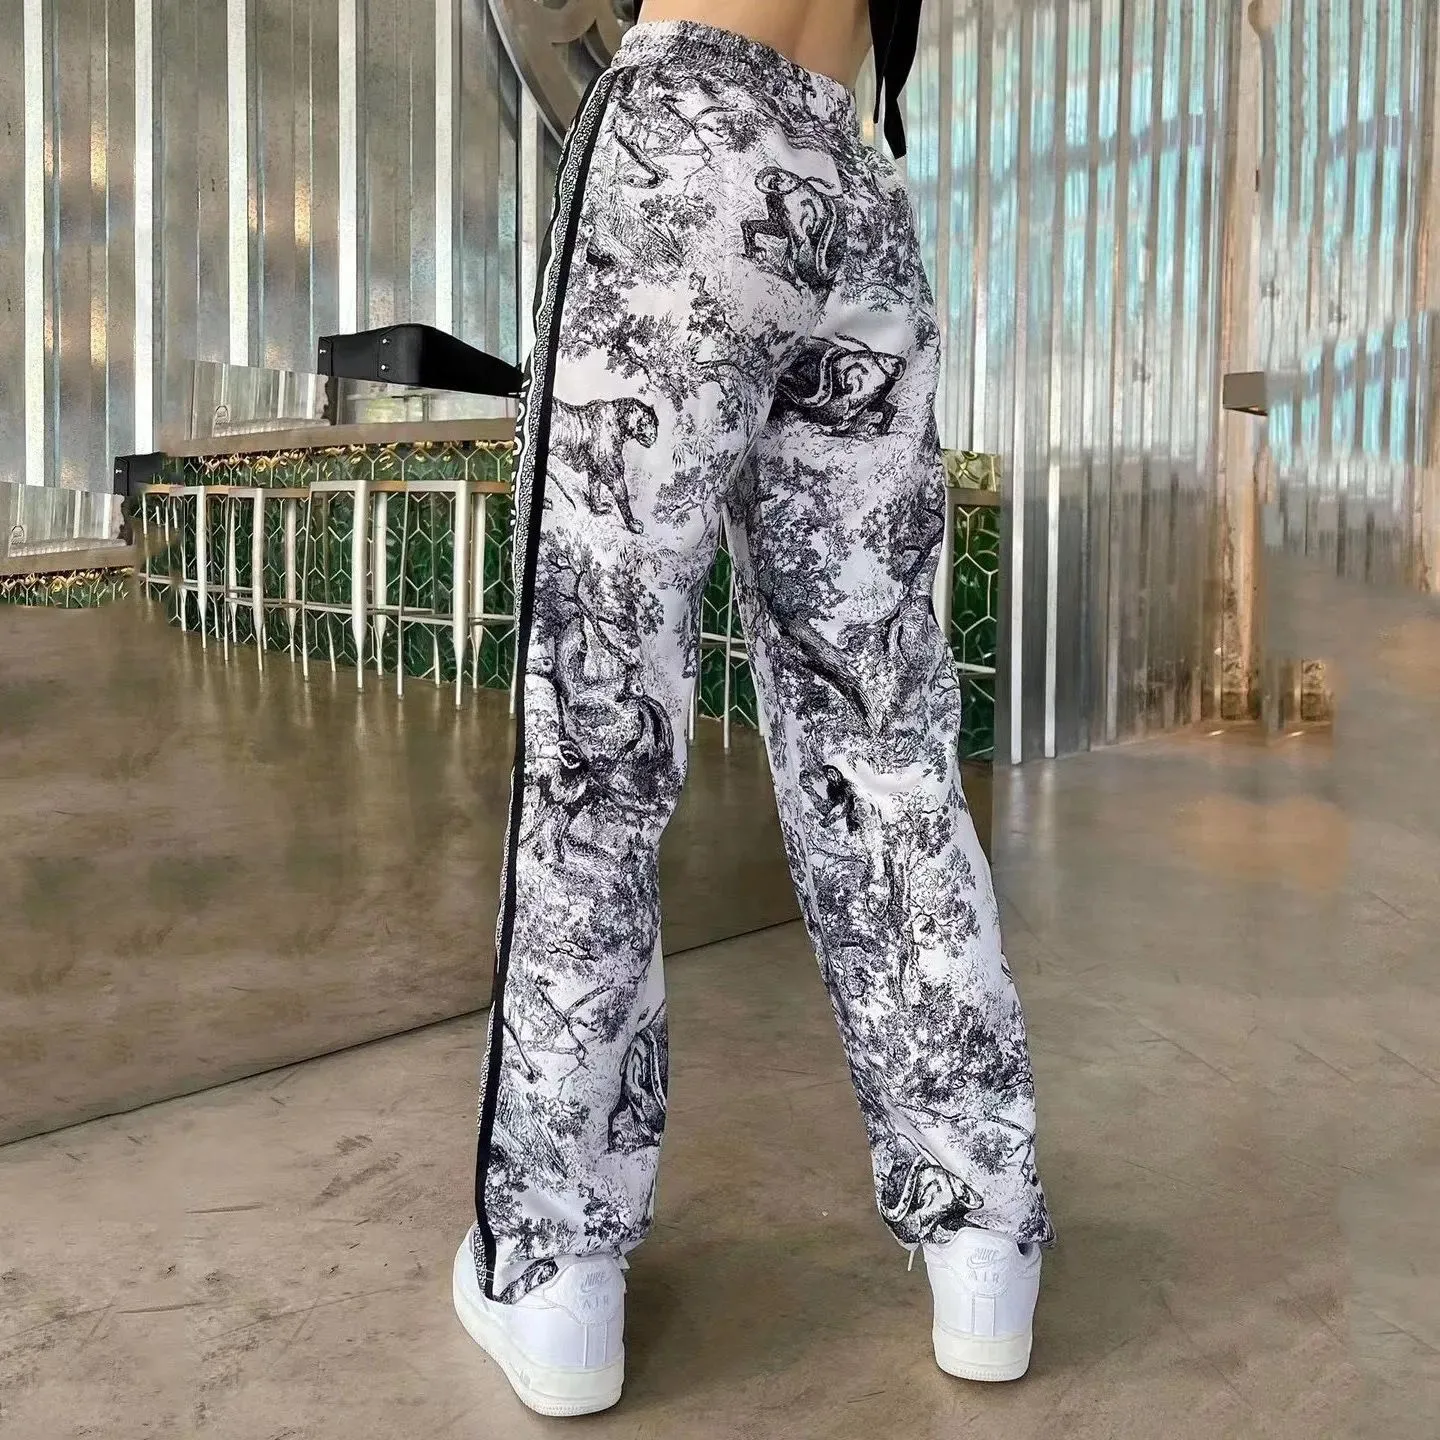 2021 Summer Fashion Women's Pants Ink Painting Animal Casual Wide Legs and High Waist Trousers